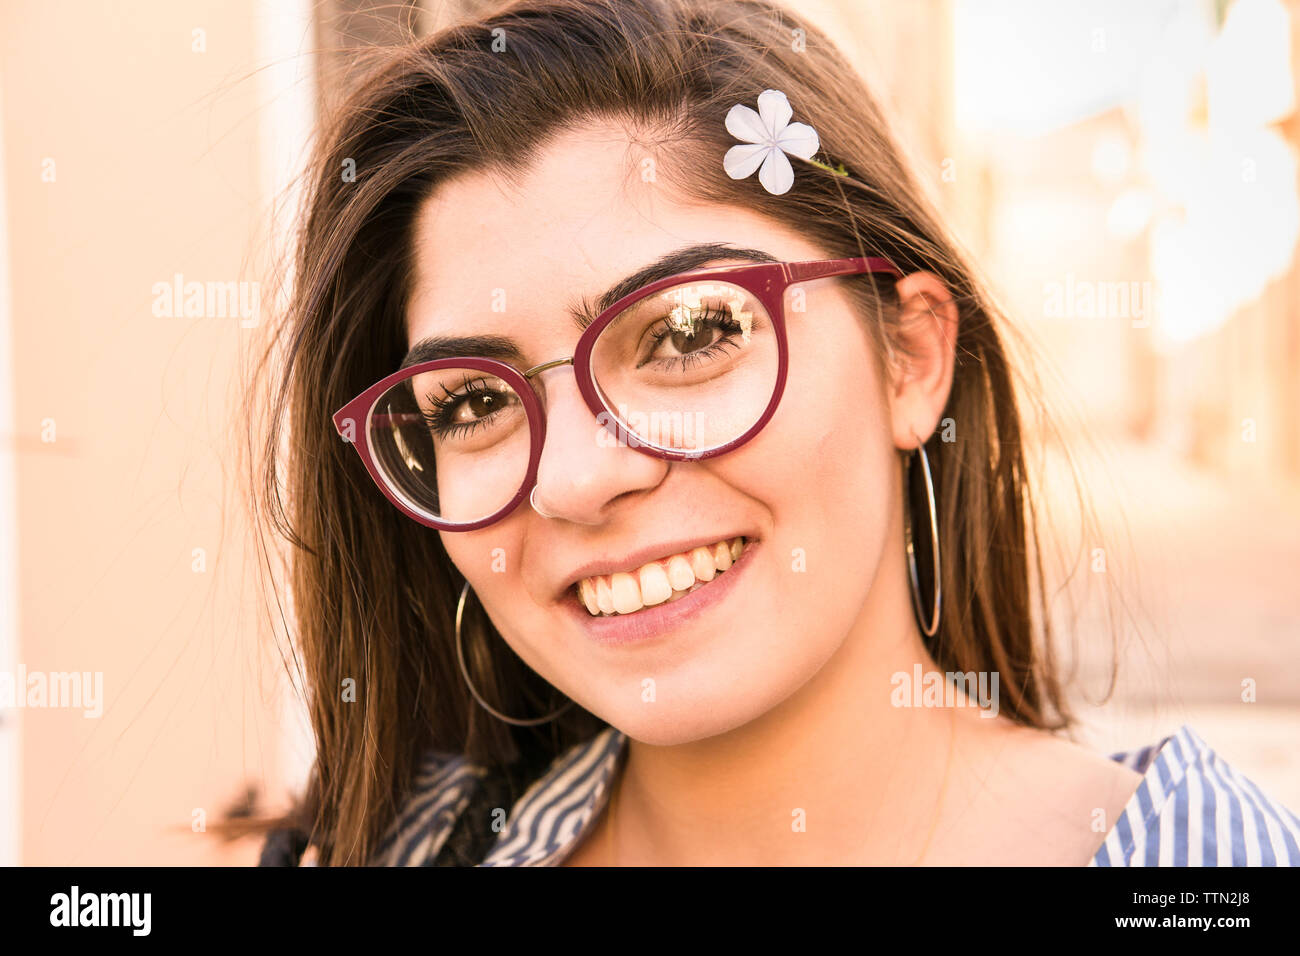 Close-up portrait of smiling teenage girl wearing flower Stock Photo